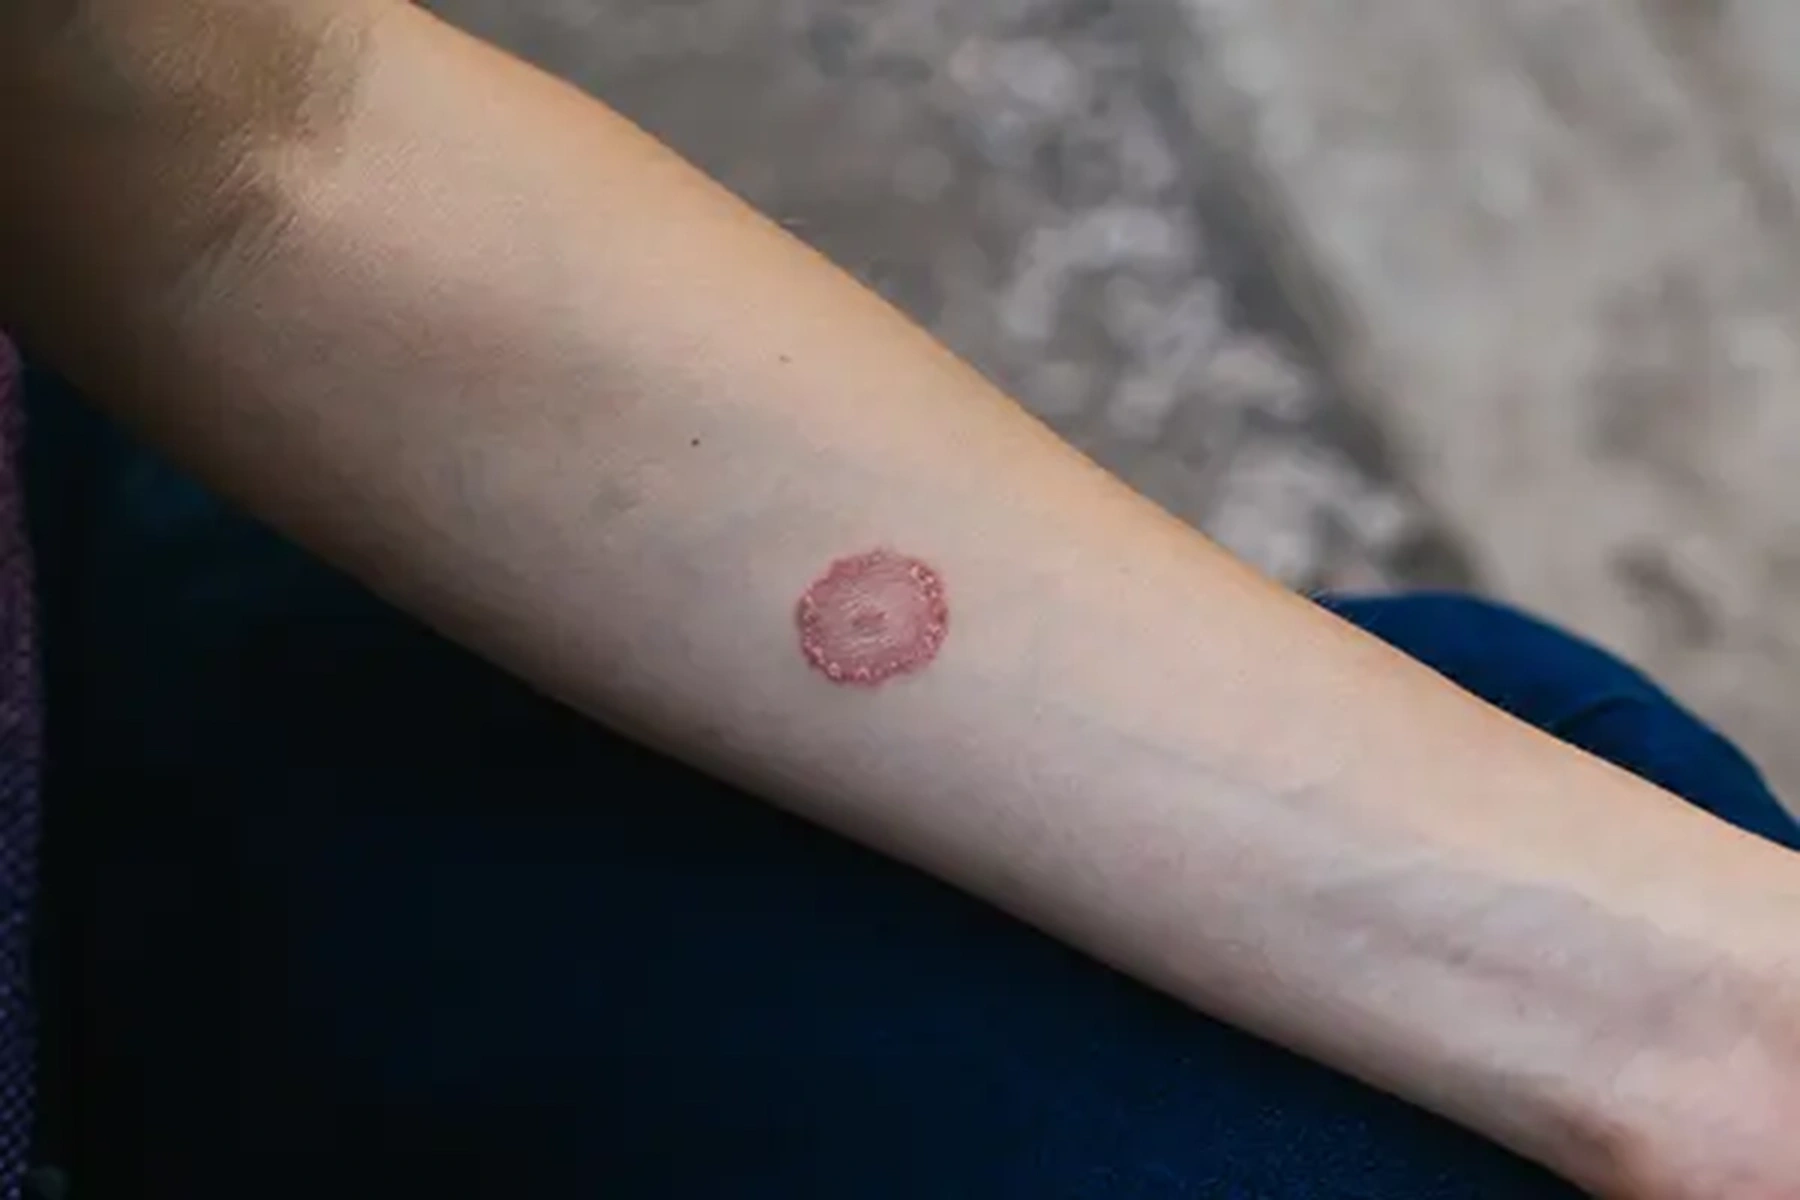 What skin infections are commonly mistaken for ringworm? - Quora